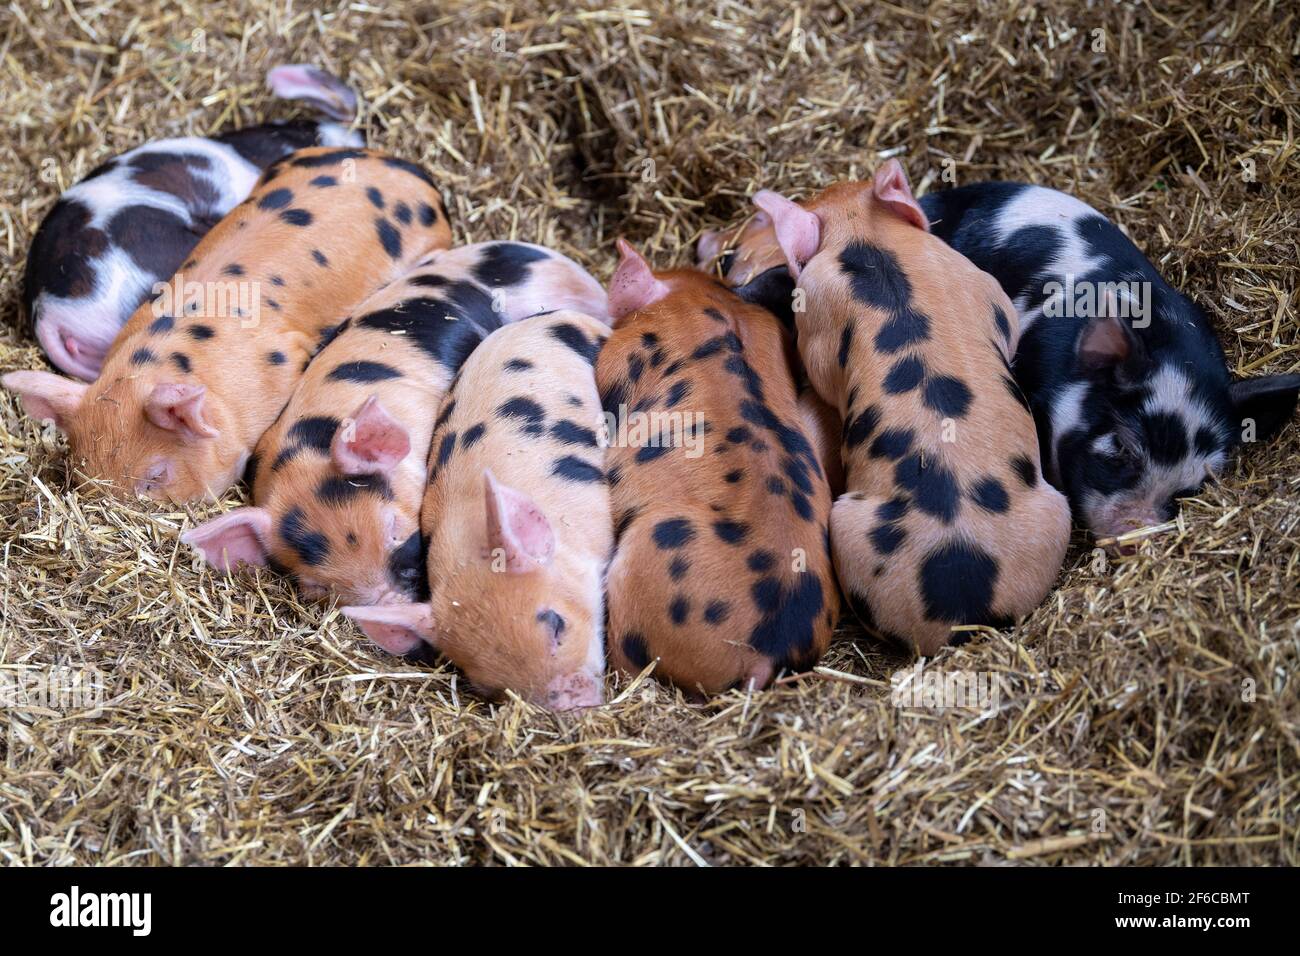 Litter of free range piglets sleeping in a pile on a straw bed, North Yorkshire, UK. Stock Photo